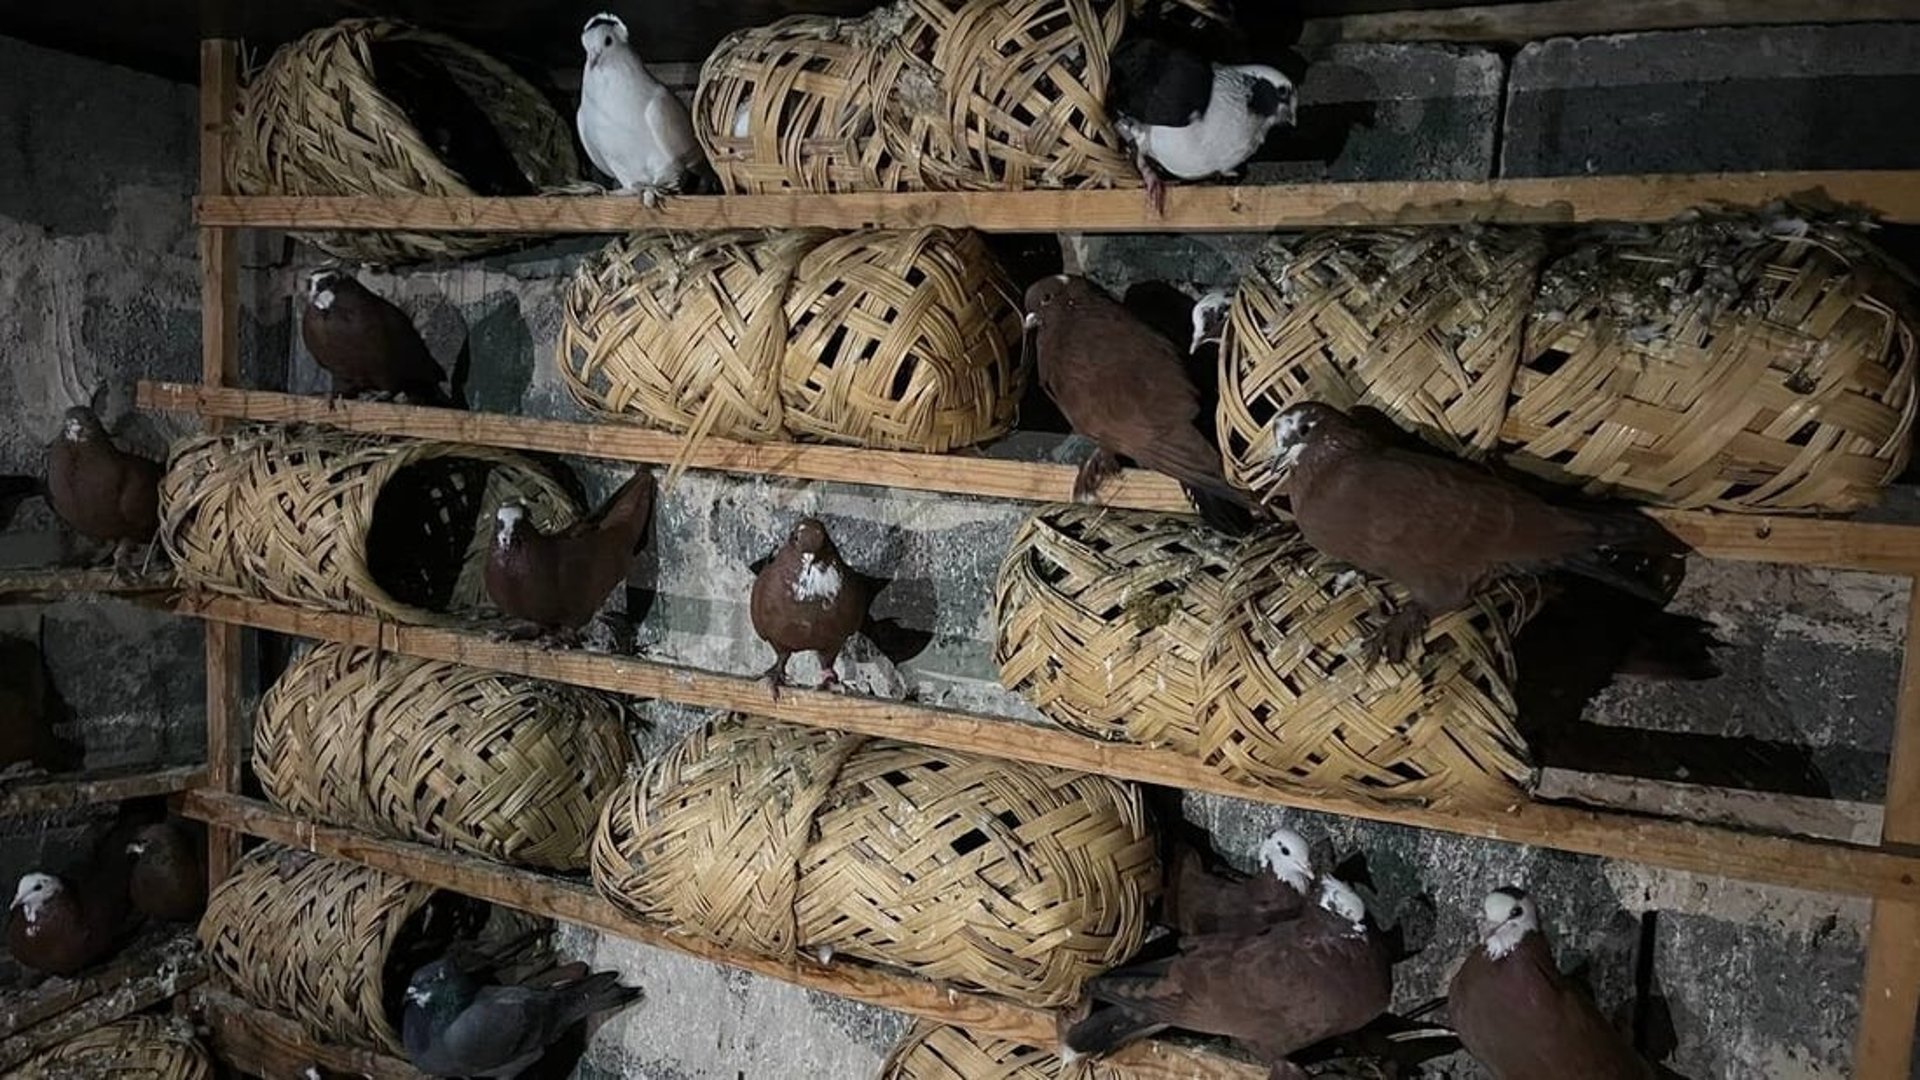 Bird theft on the rise in Diyala prompting breeders to install surveillance cameras